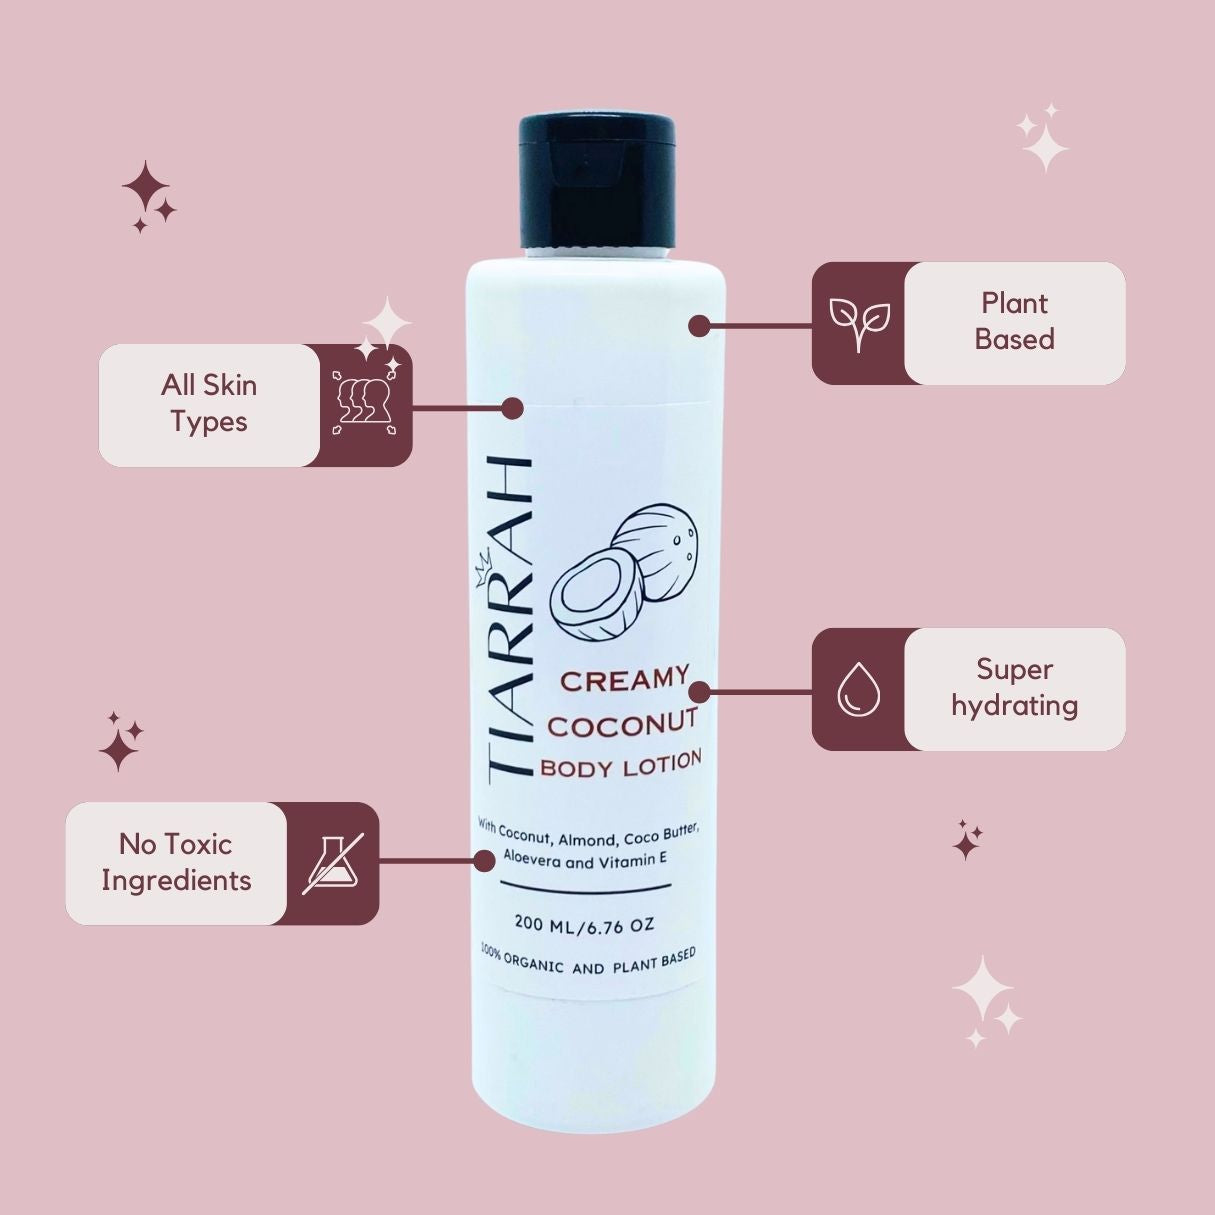 Tiarrah's Creamy Coconut Body Lotion: Natural & Non-Toxic - The Luxury Bath and Body Care Shop